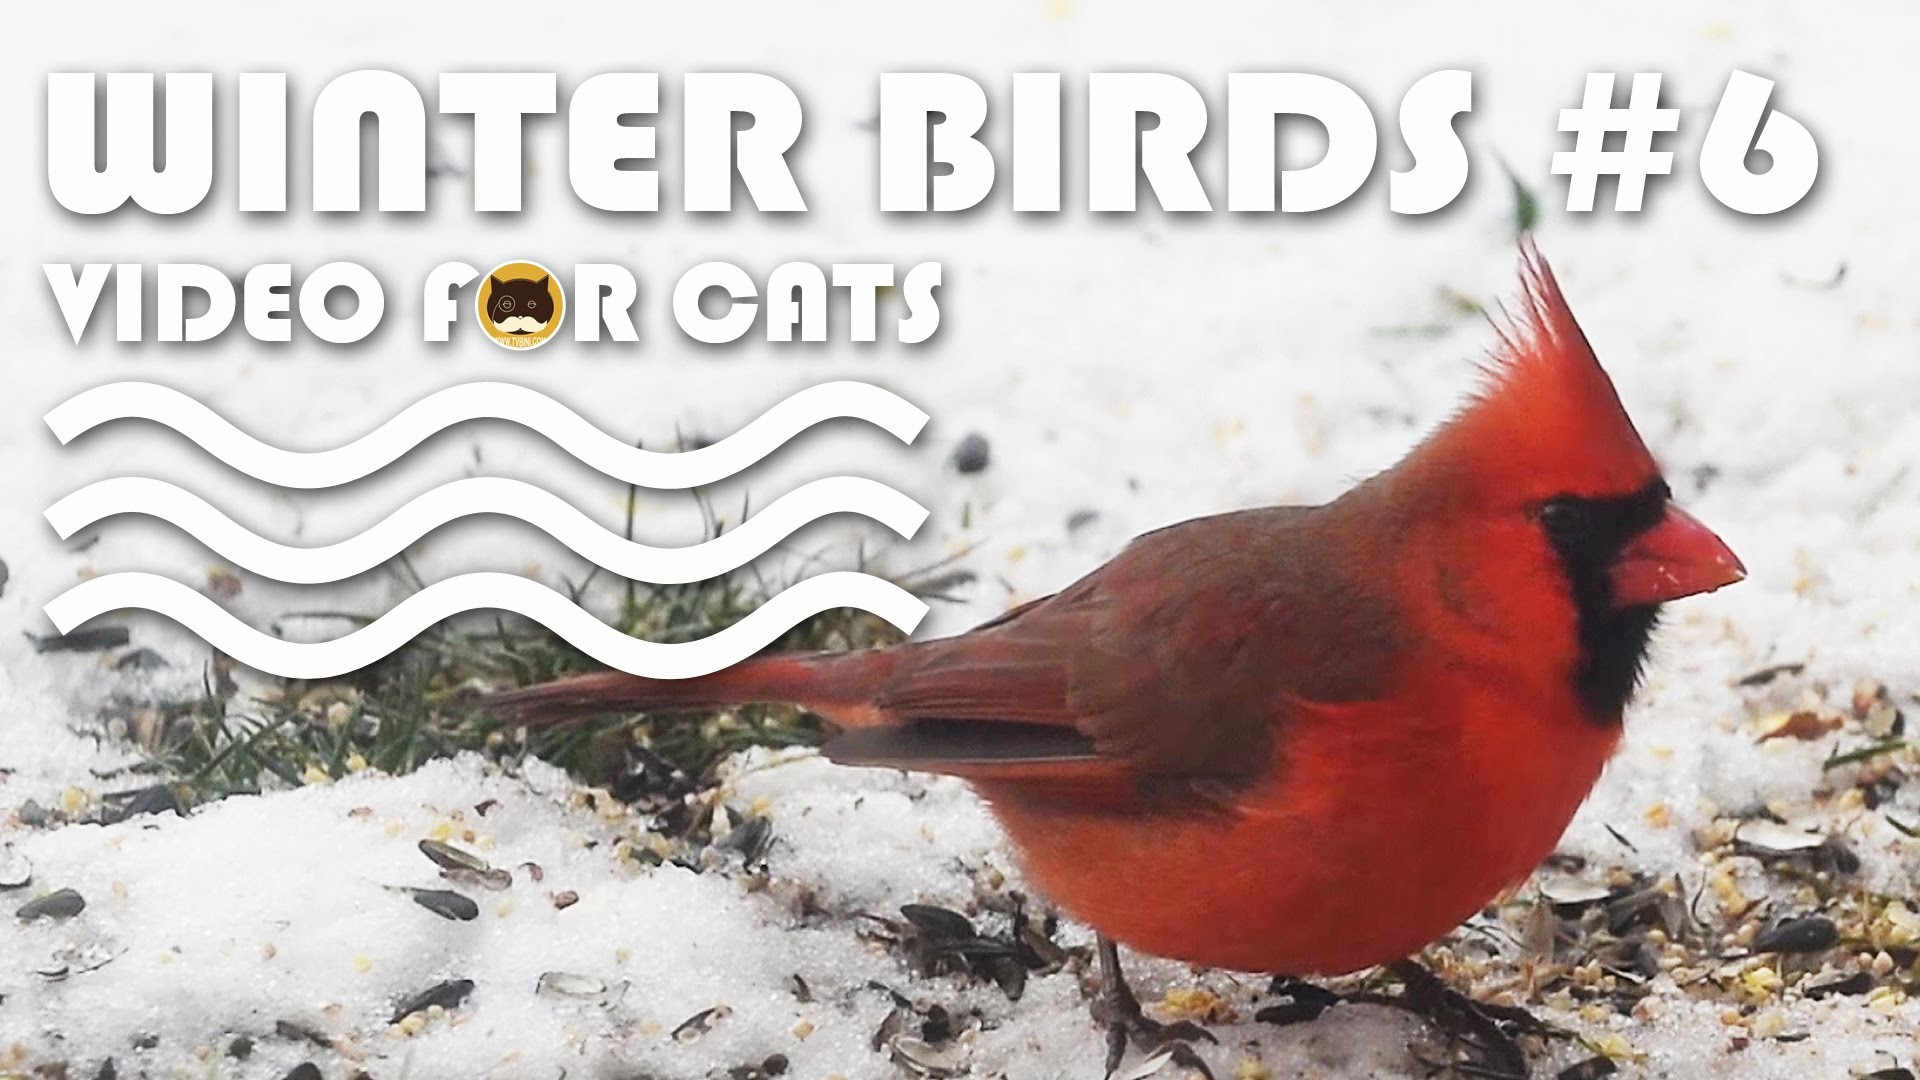 1920x1080 Winter Birds #6: N.Cardinal, Sparrows, M.Doves, Dark-eyed Junco, Finches. -  YouTube